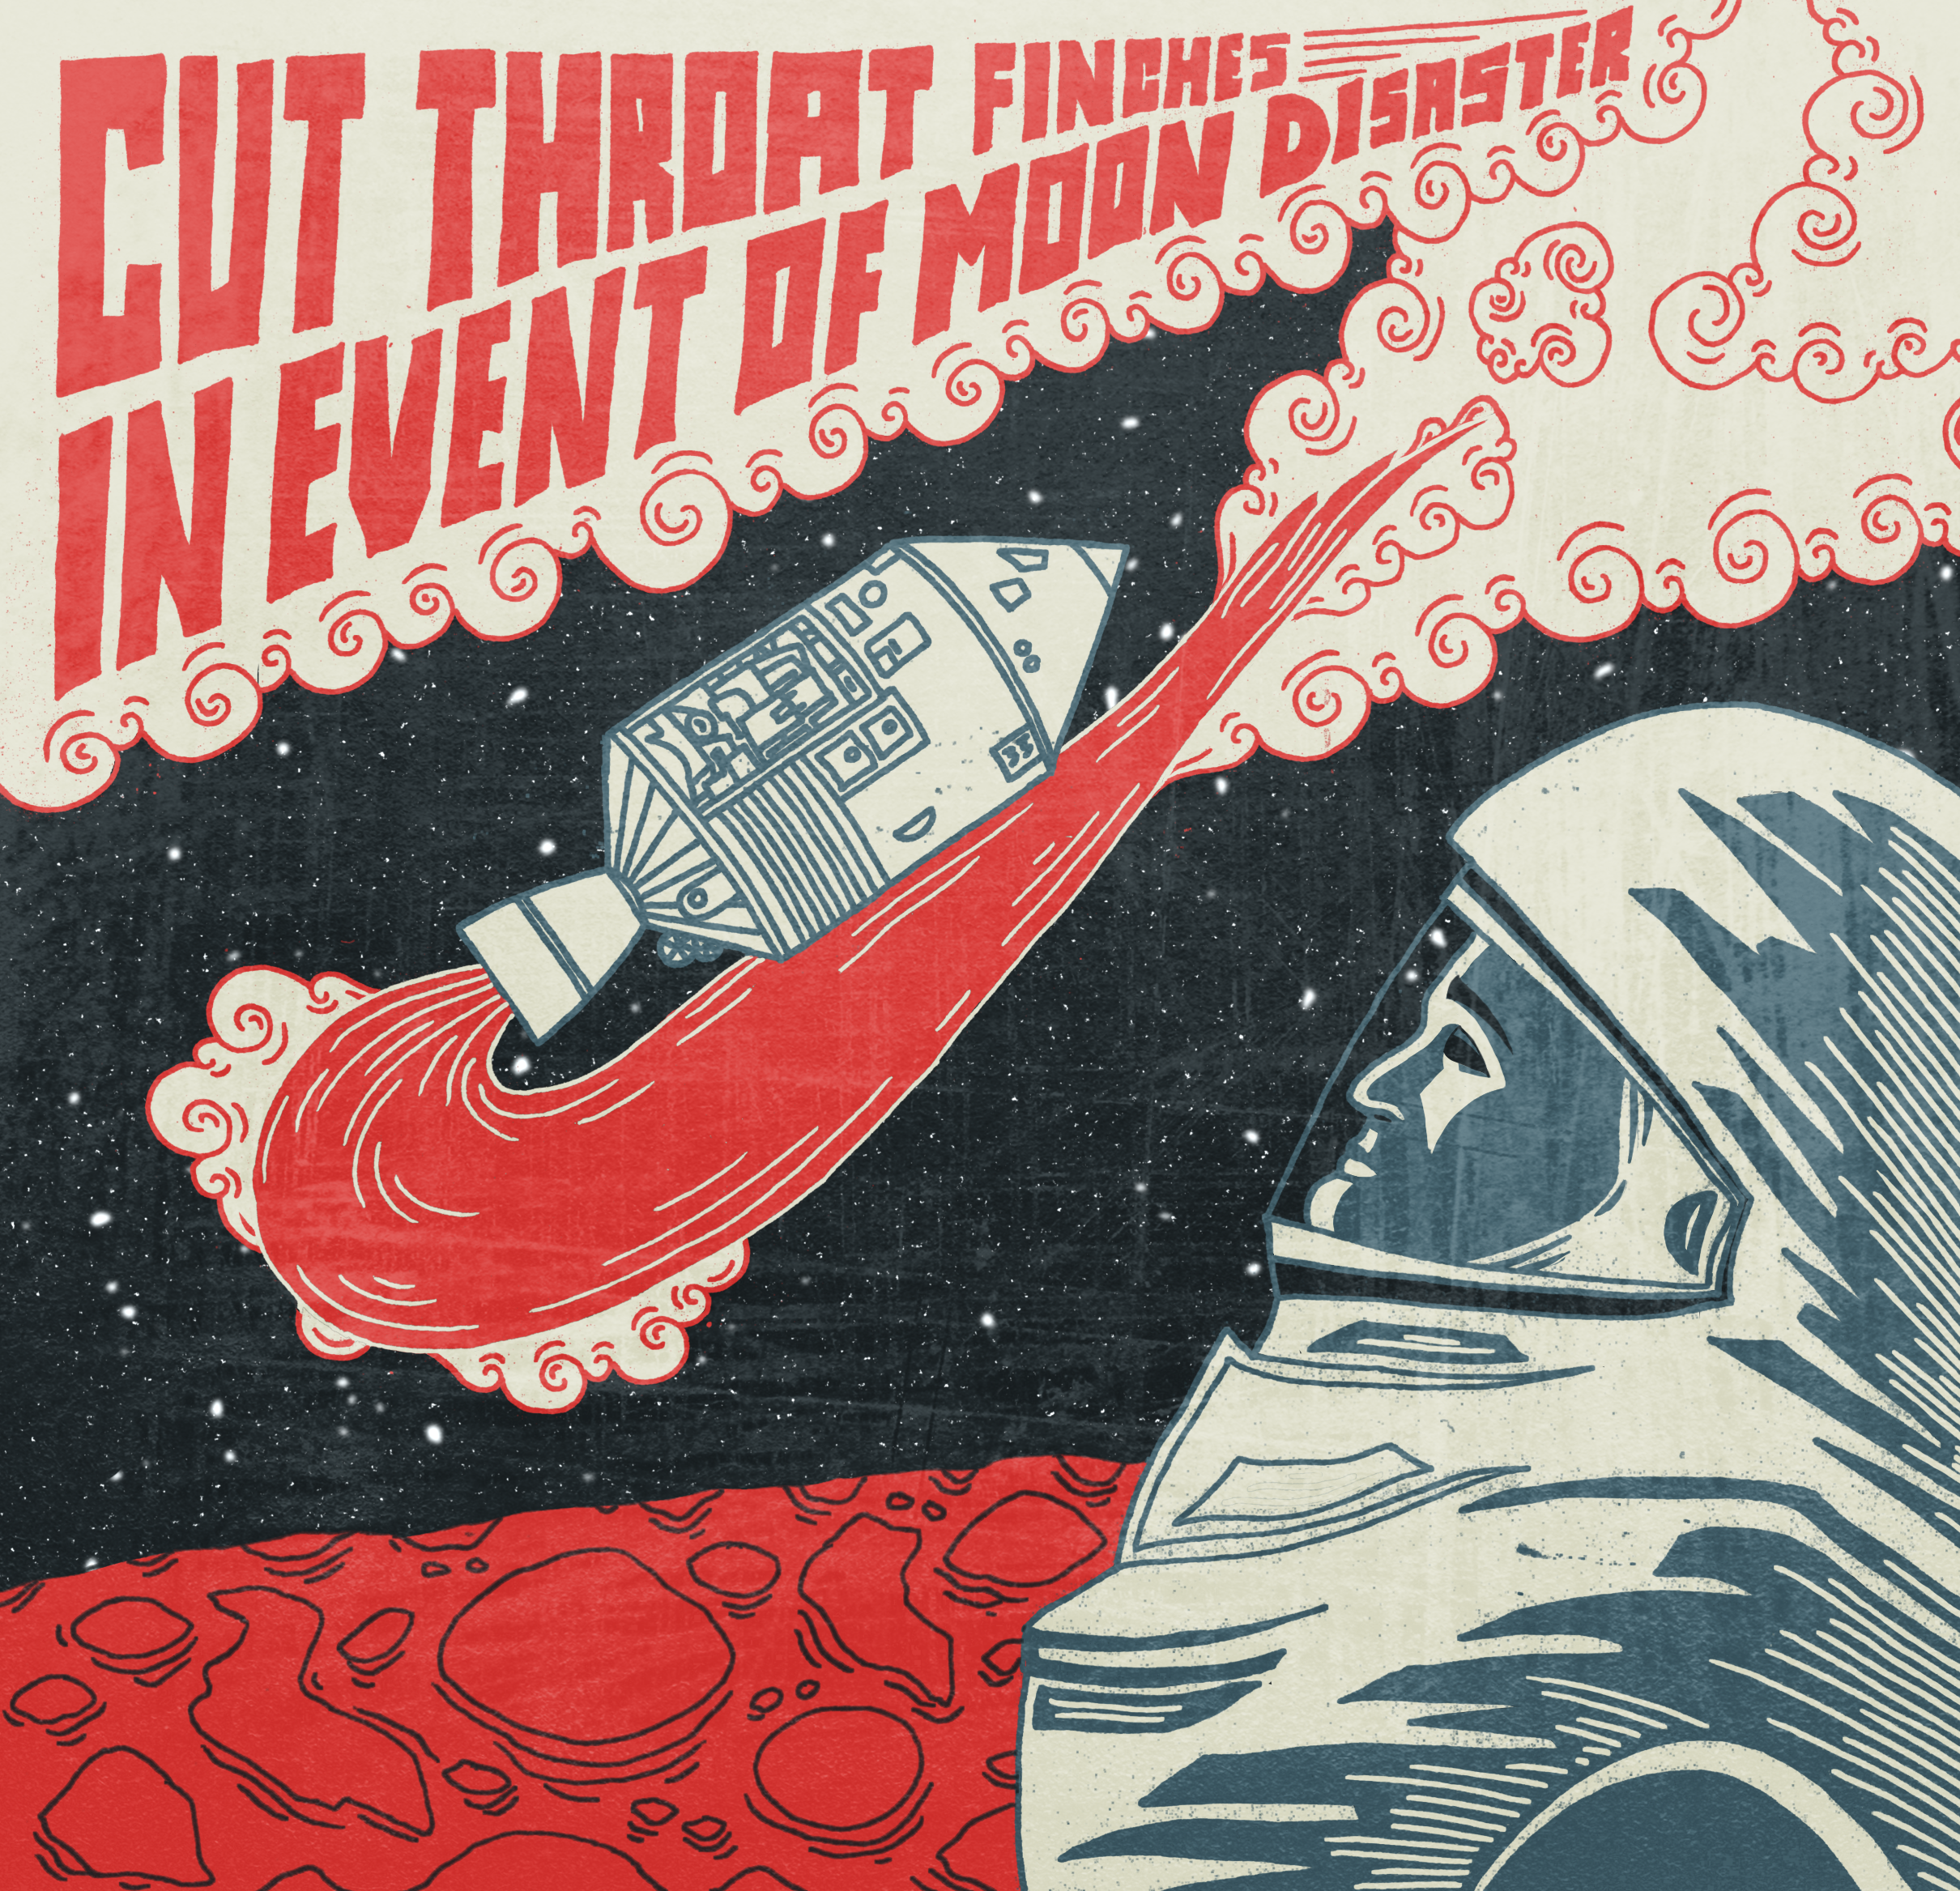 Cut Throat Finches "In Event Of Moon Disaster" Album Cover